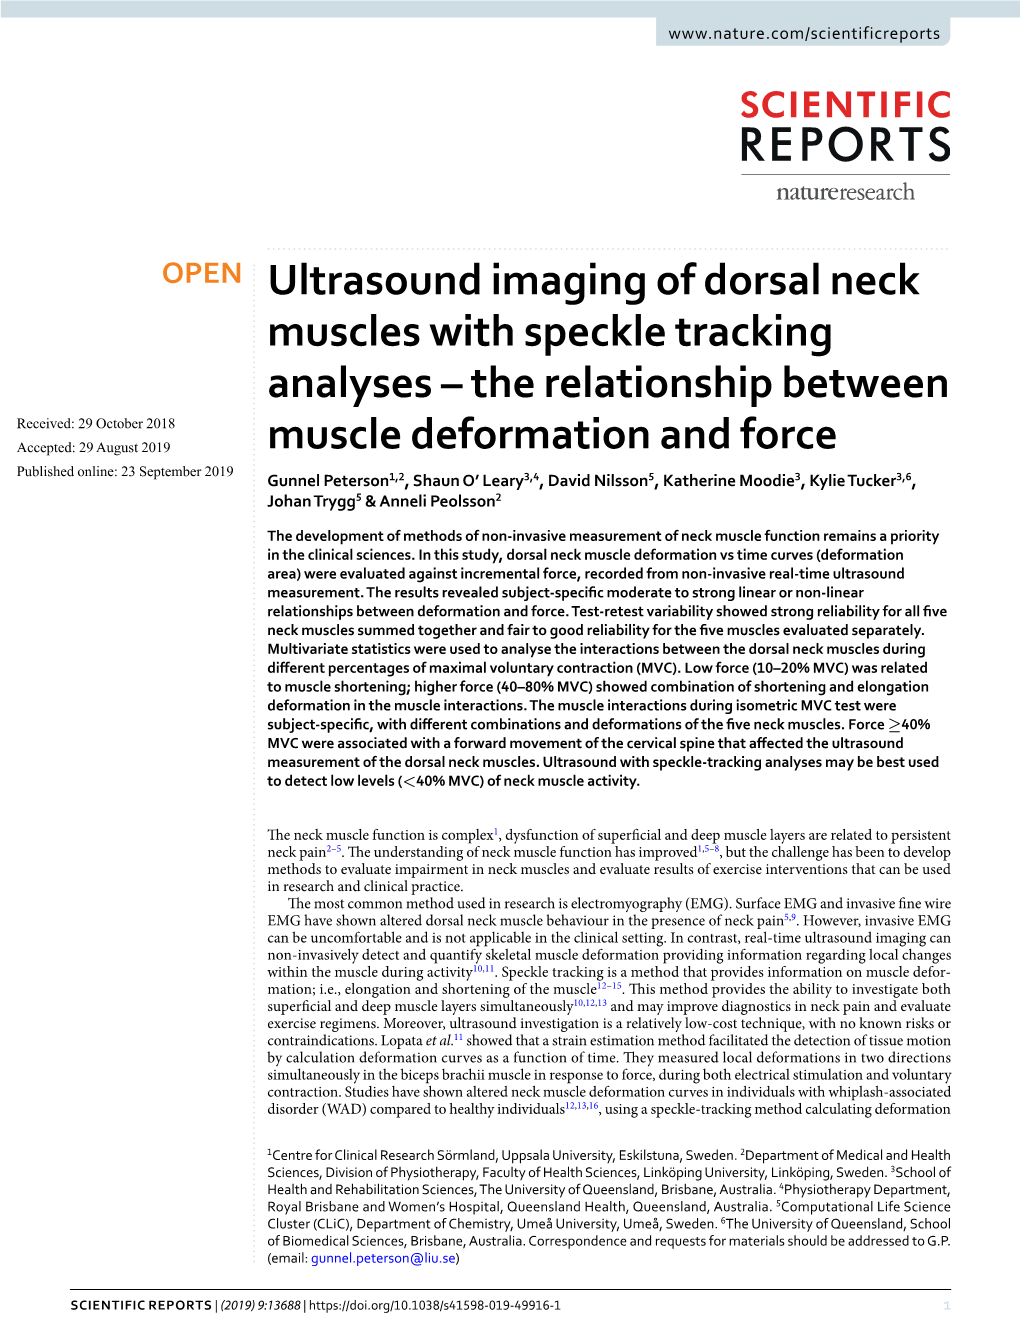 Ultrasound Imaging of Dorsal Neck Muscles with Speckle Tracking